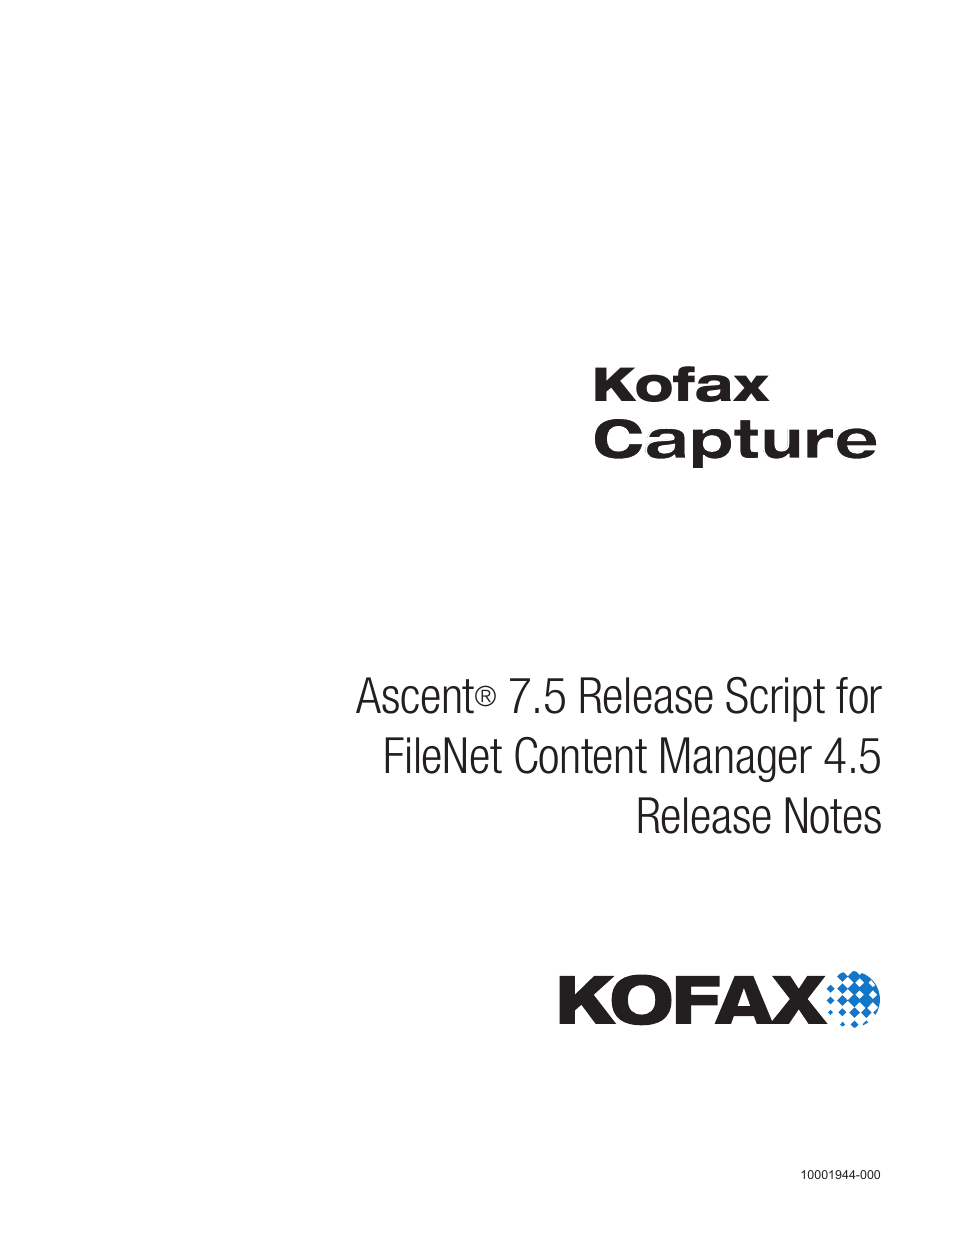 Kofax Ascen 7.5 Release Script for FileNet Content Manager 4.5 User Manual | 42 pages